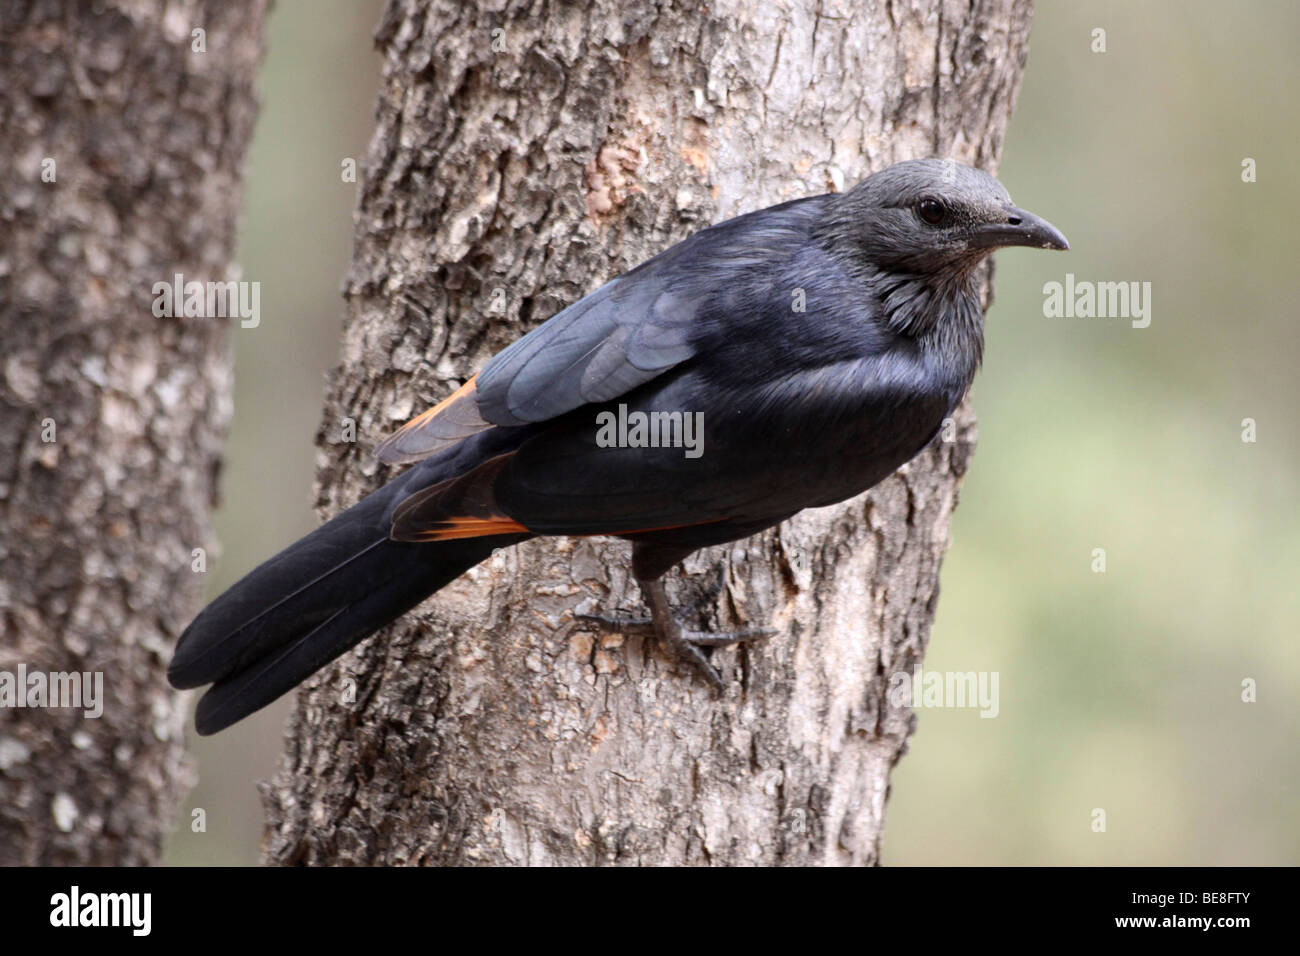 Female Red-winged Starling Onychognathus morio In The Kruger National Park, South Africa Stock Photo